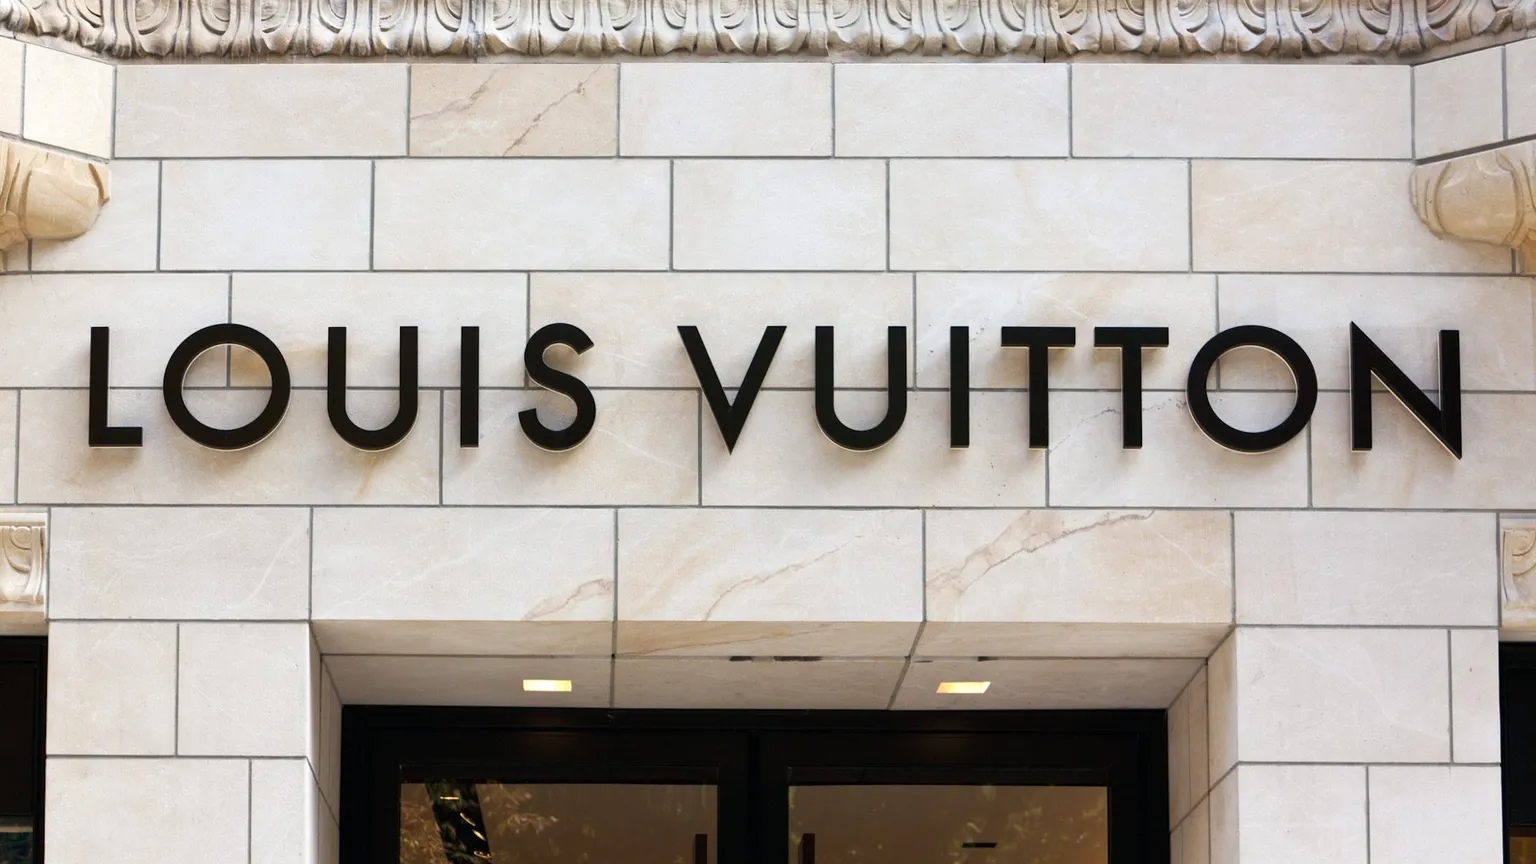 Louis Vuitton store sign in Germany. Image: Shutterstock